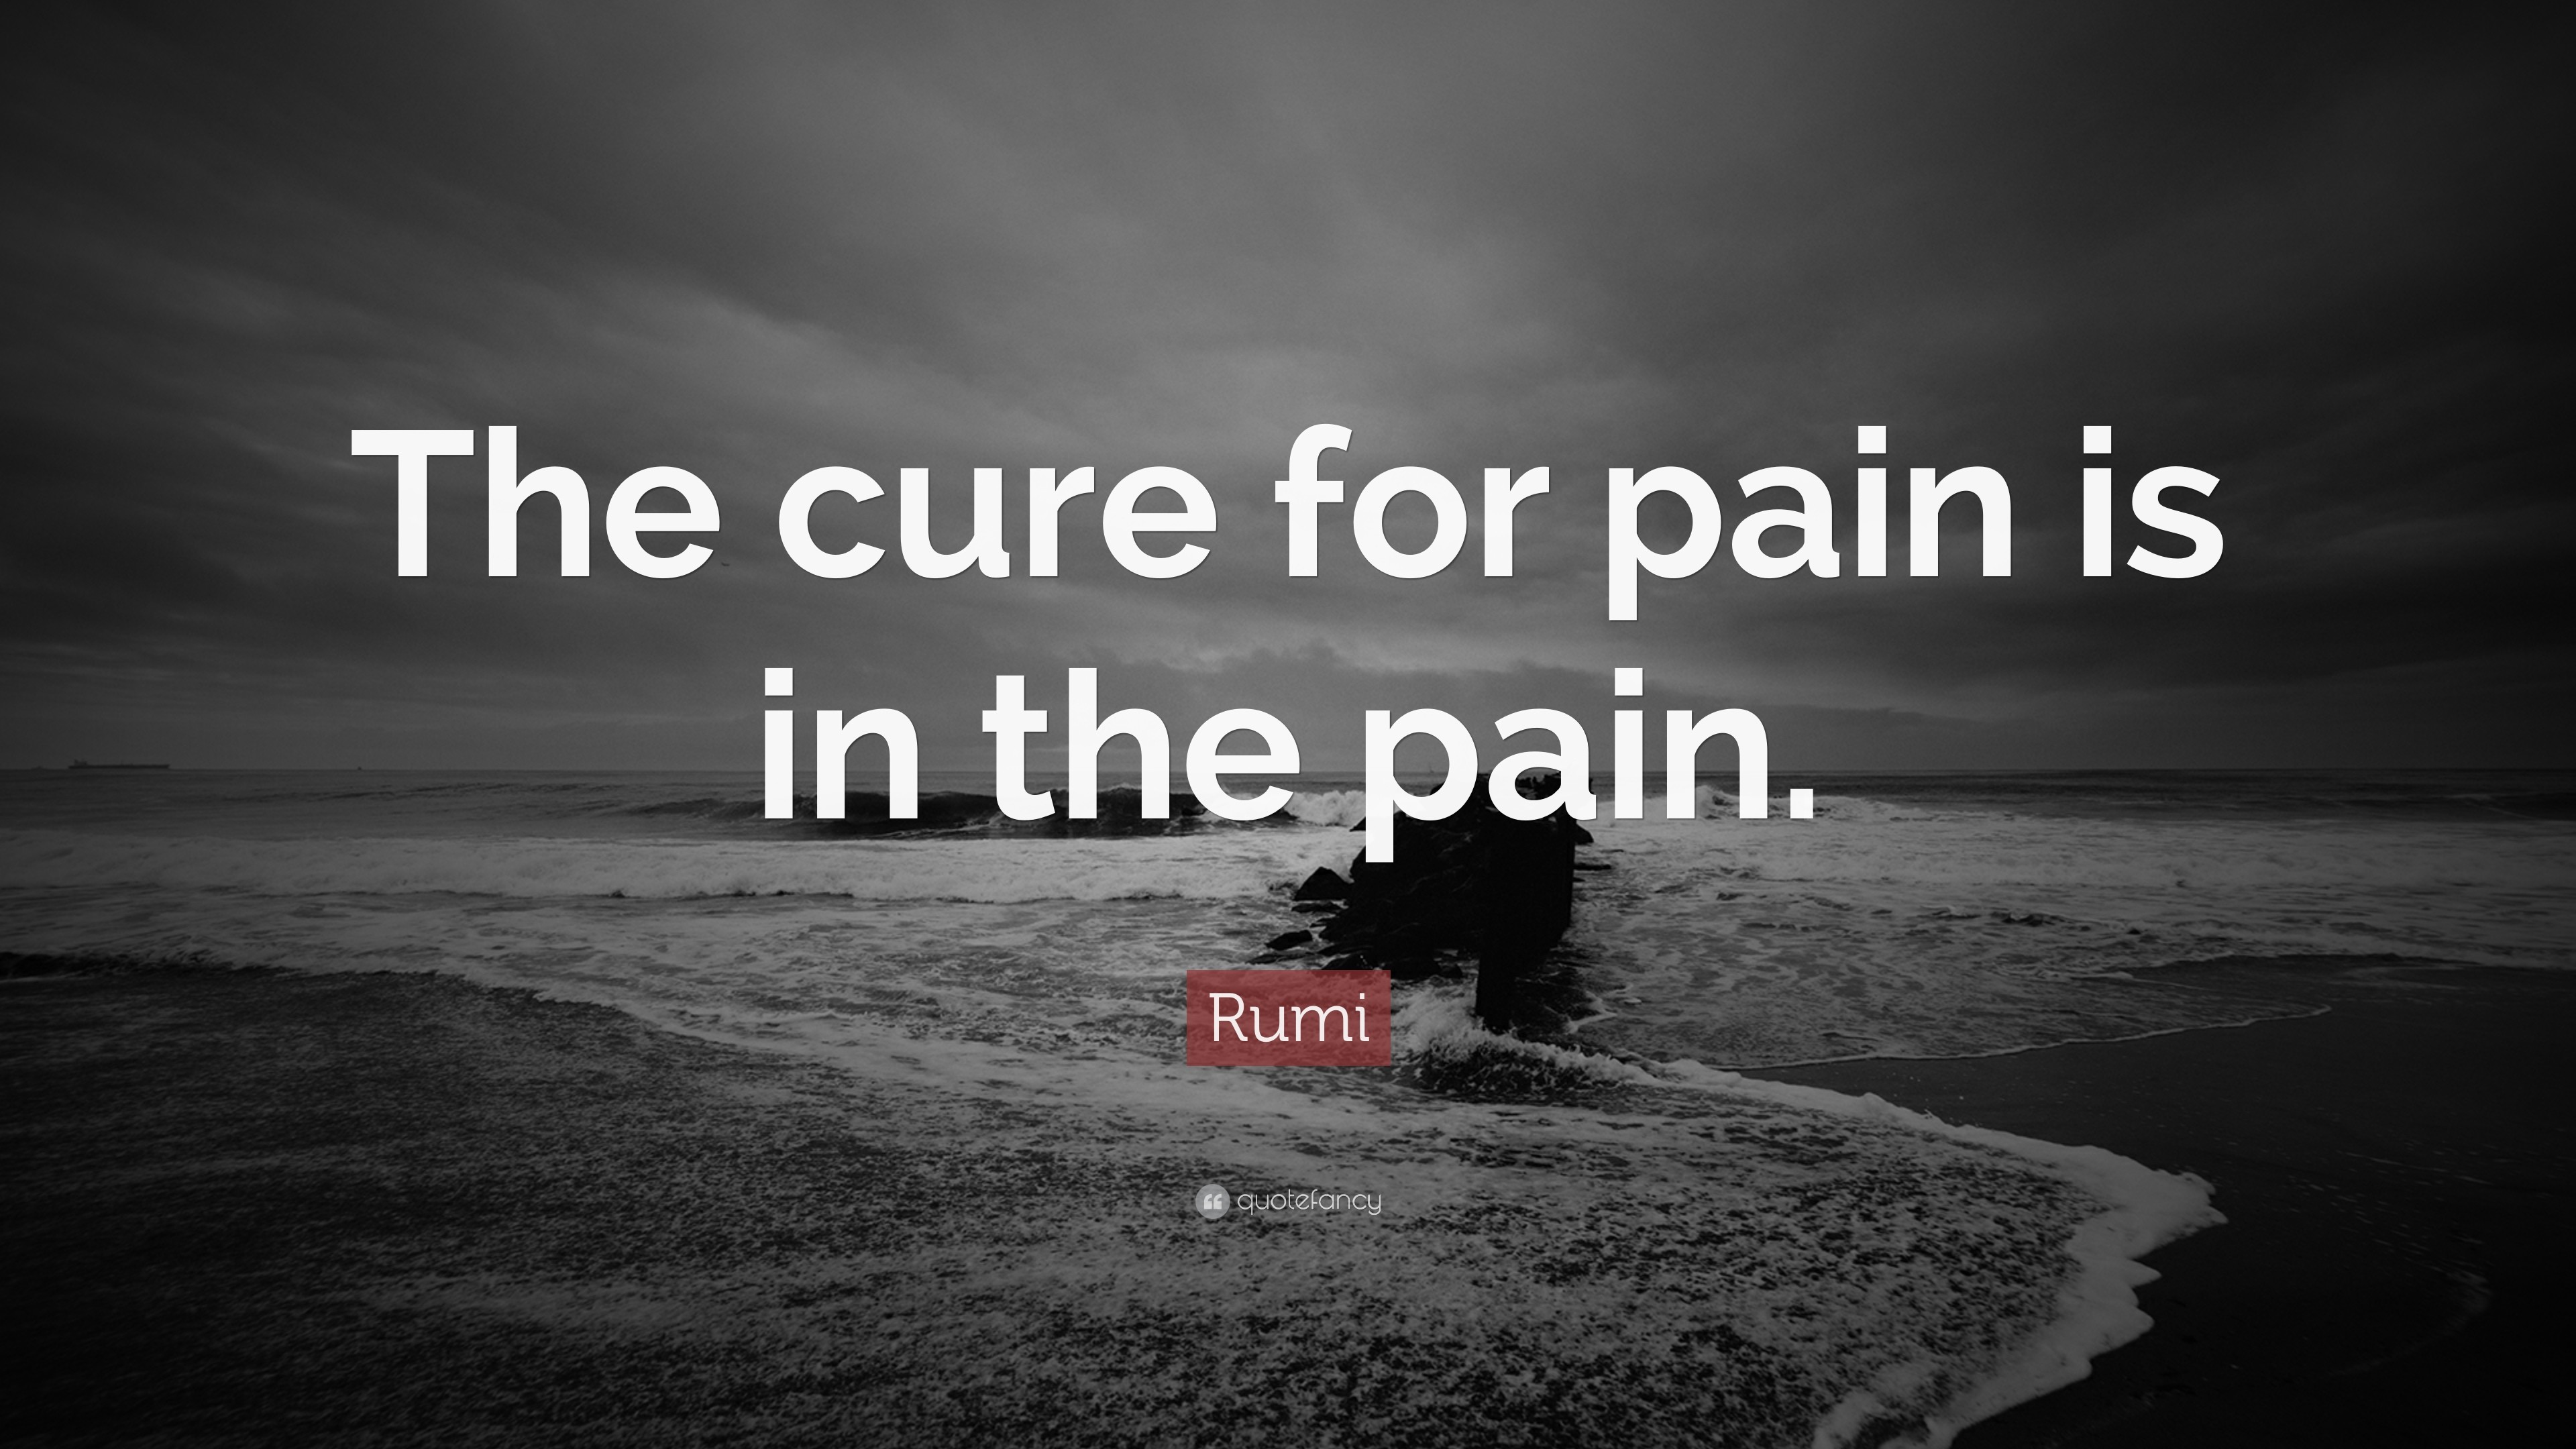 Spiritual Quotes The cure for pain is in the pain. Rumi